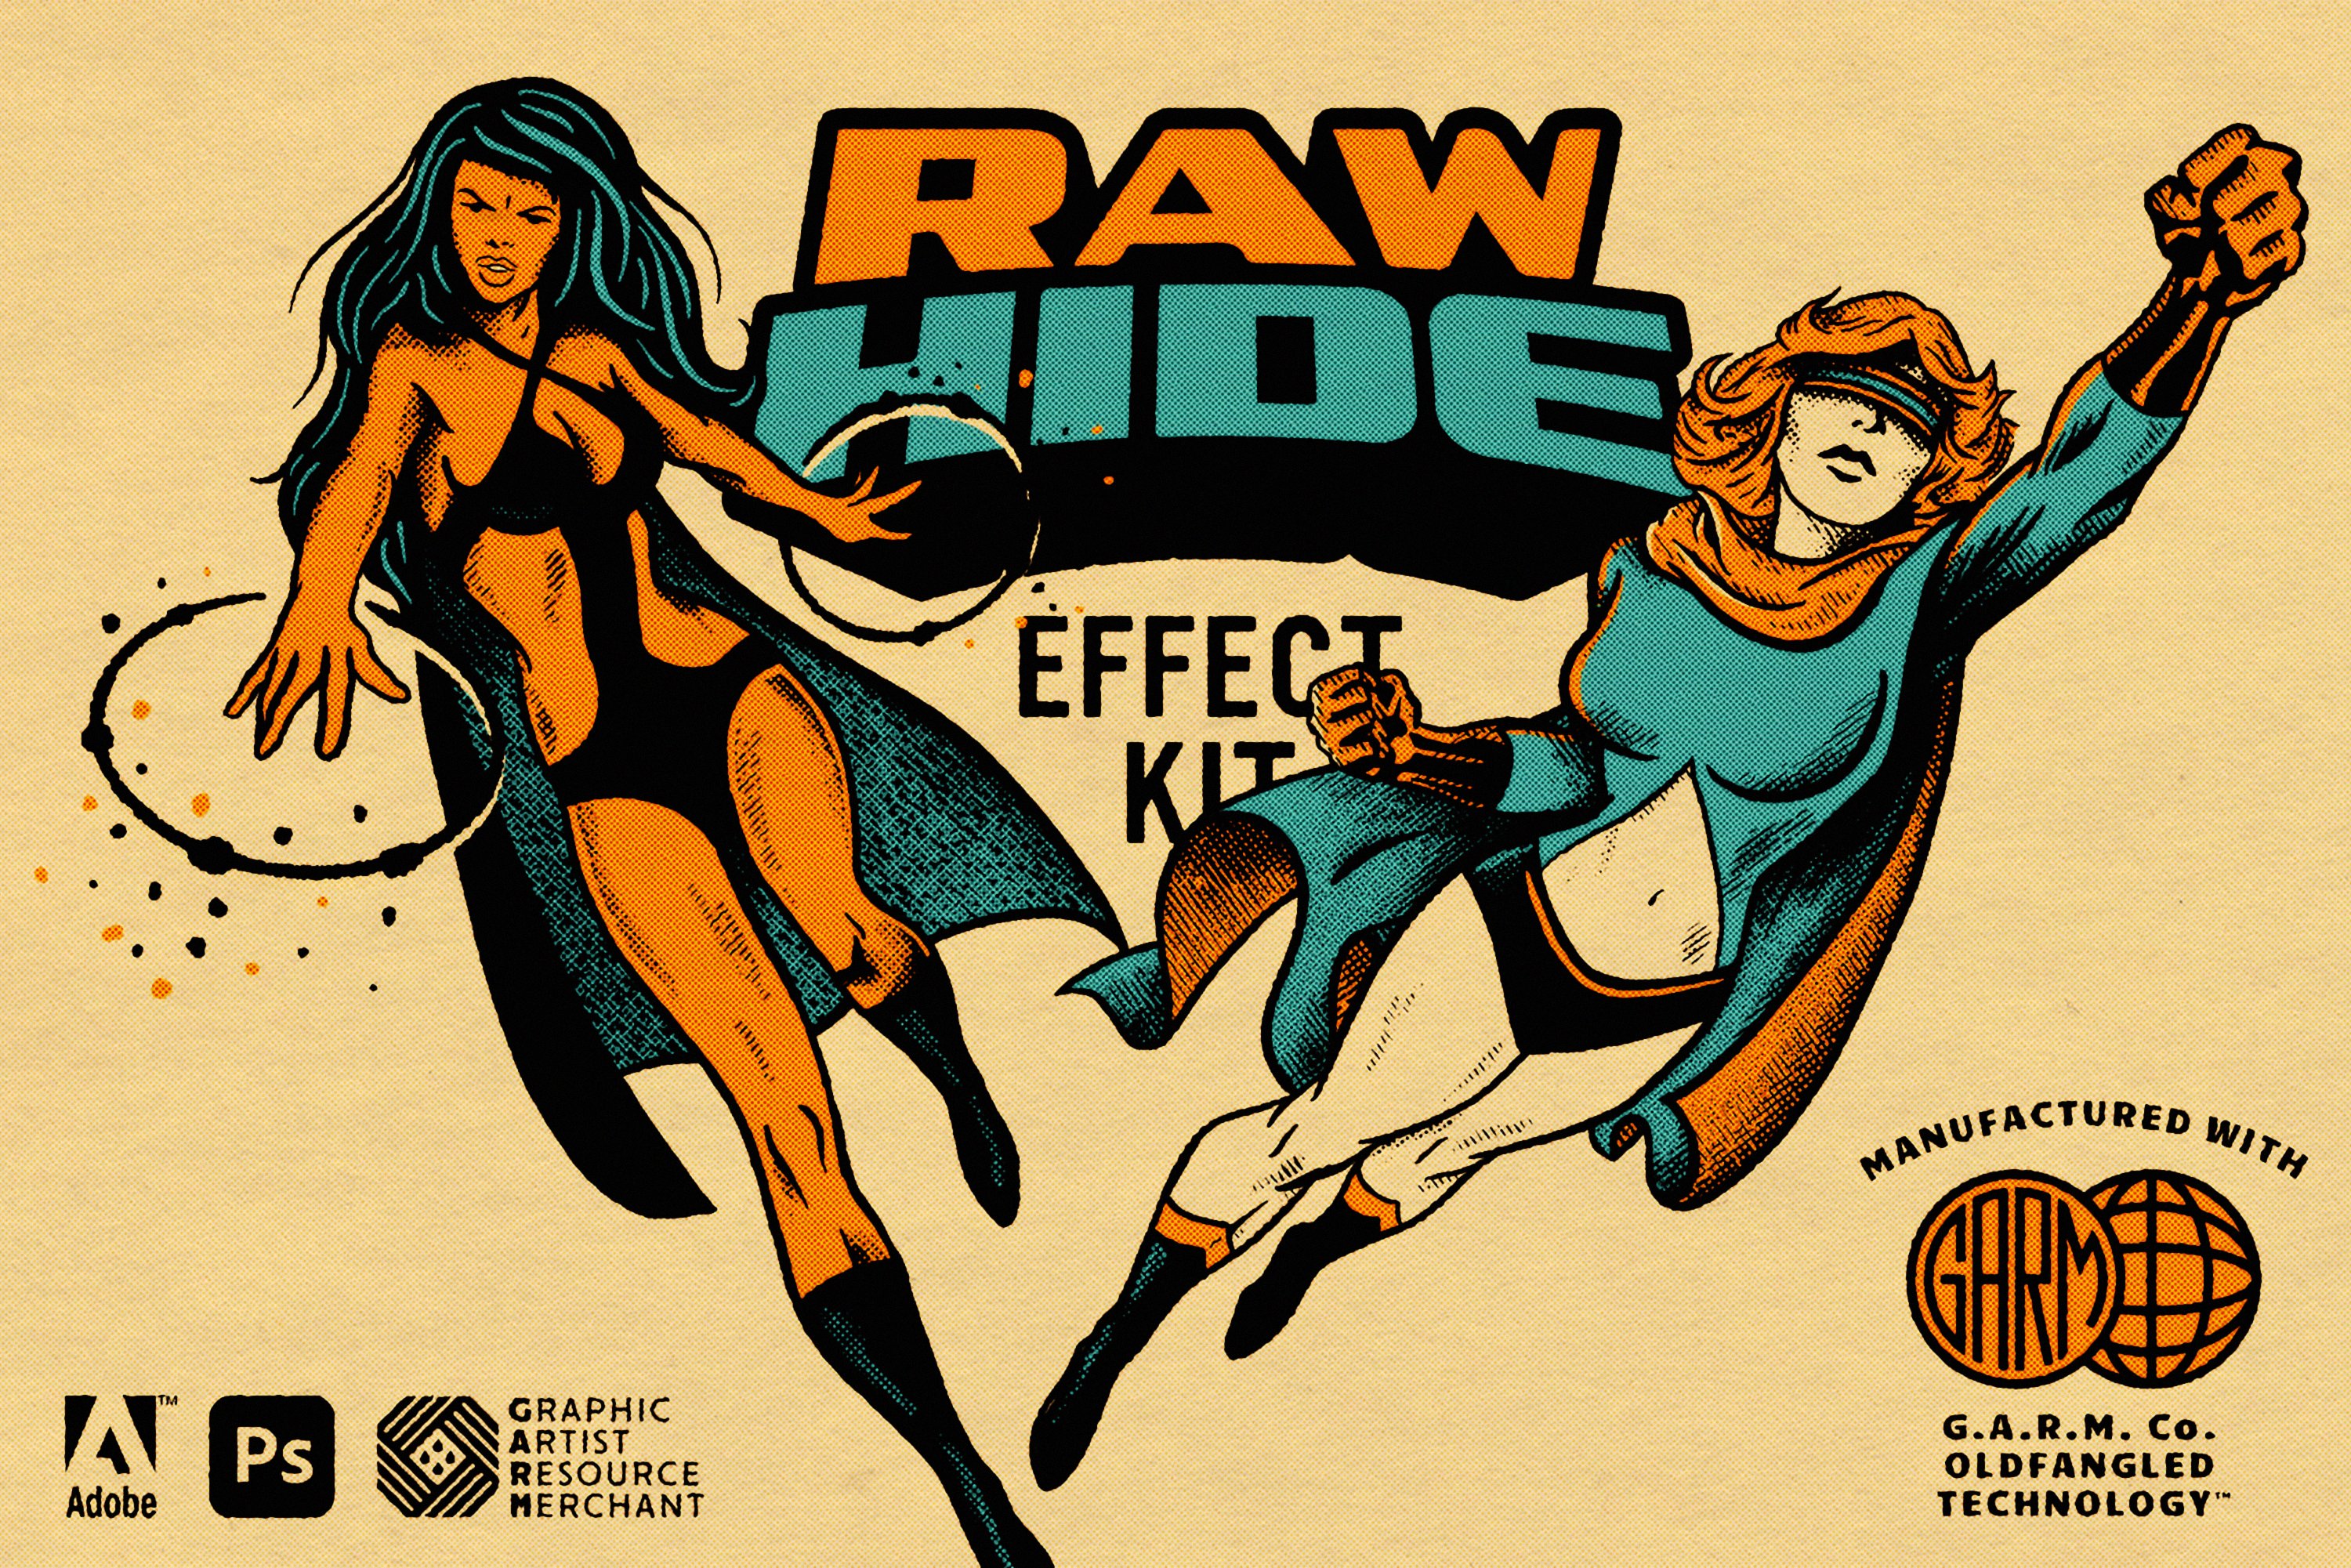 Raw Hide Photoshop Effect Kitcover image.